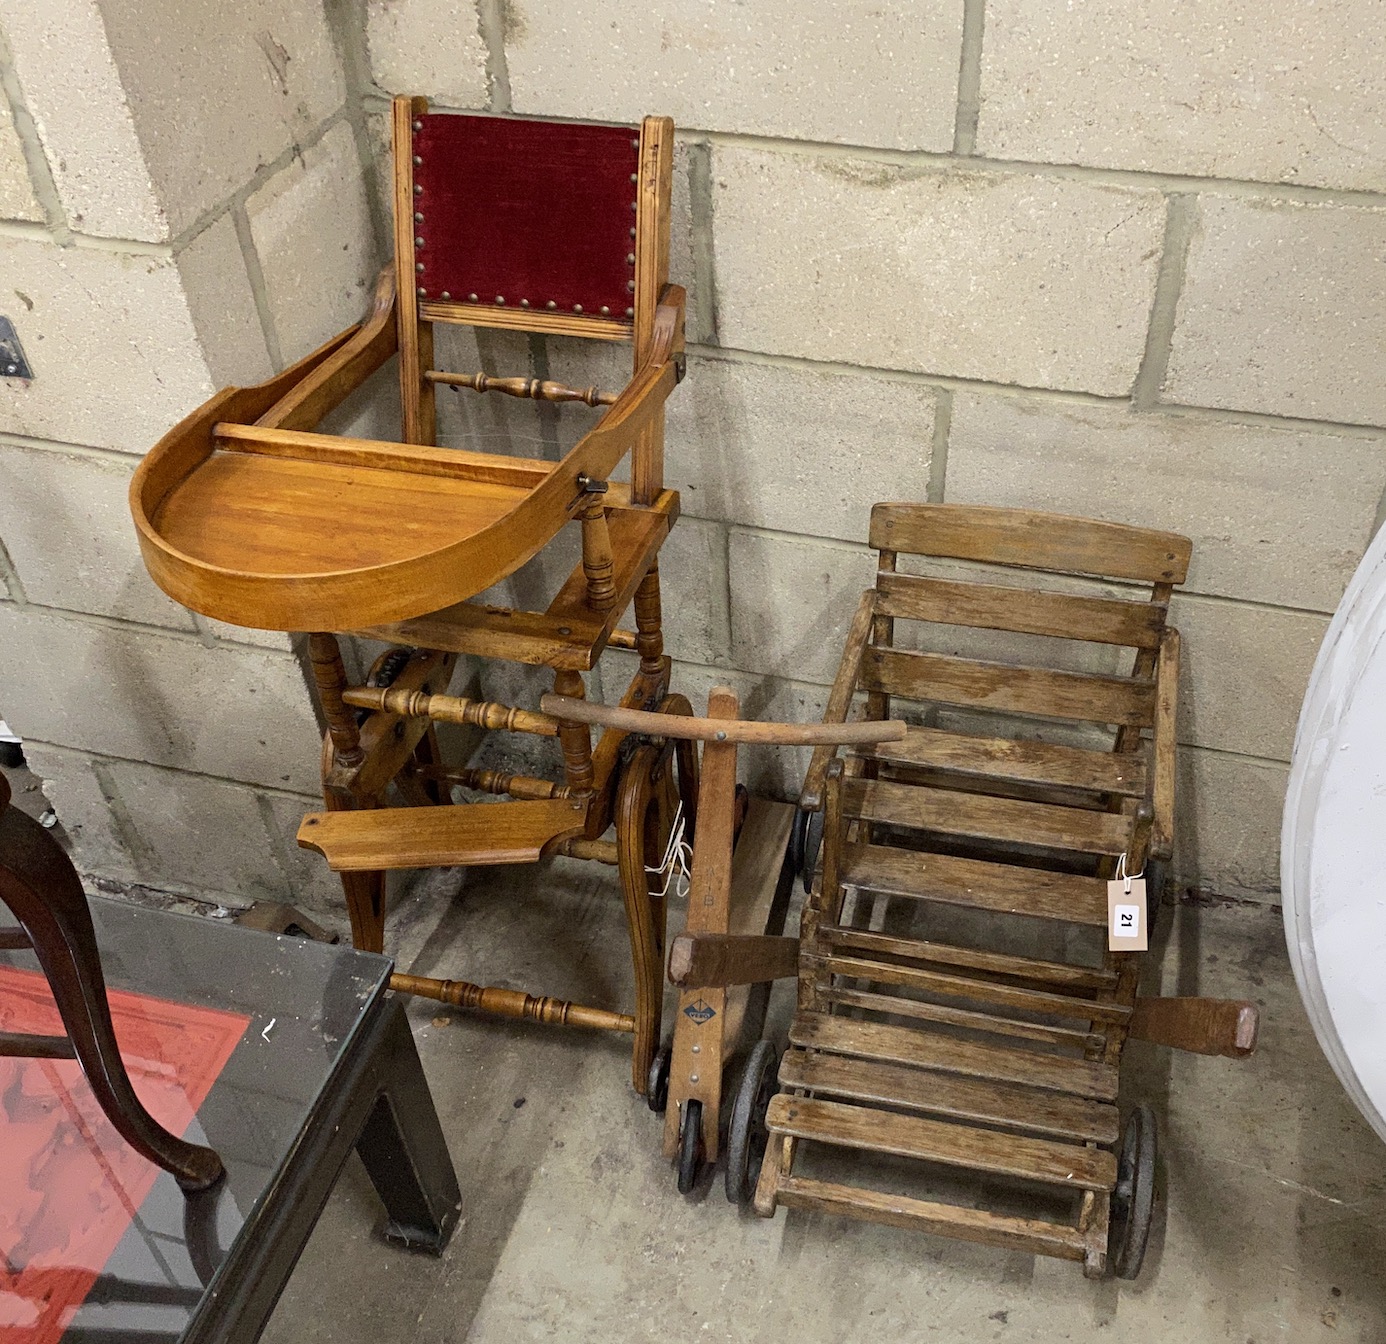 An early 20th century French pull along child's chair, a metamorphic child's chair and a scooter